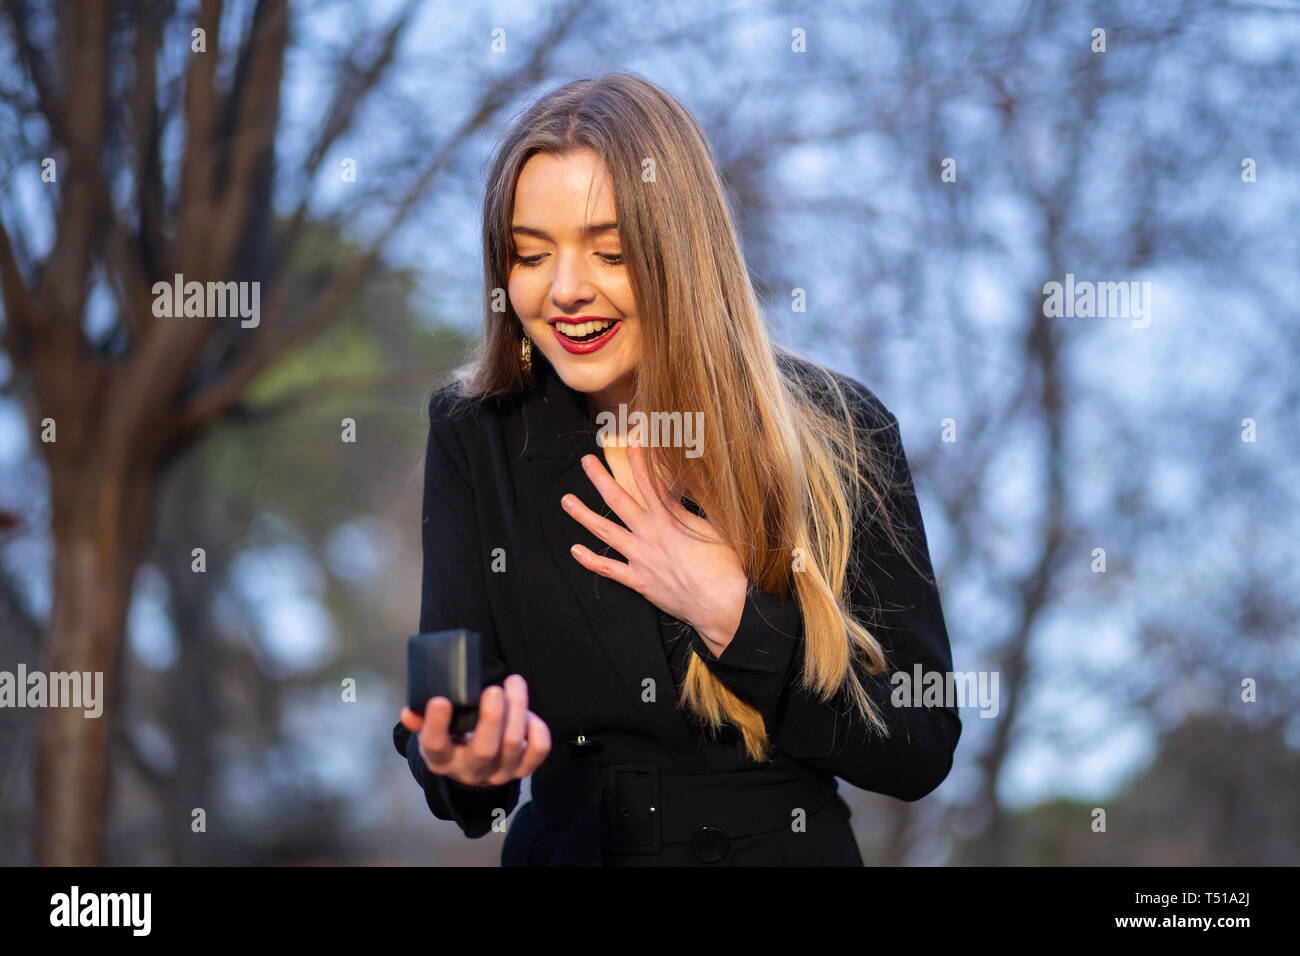 Beautiful young lady in stylish outfit looking at wedding ring in box while standing on blurred background of park Stock Photo